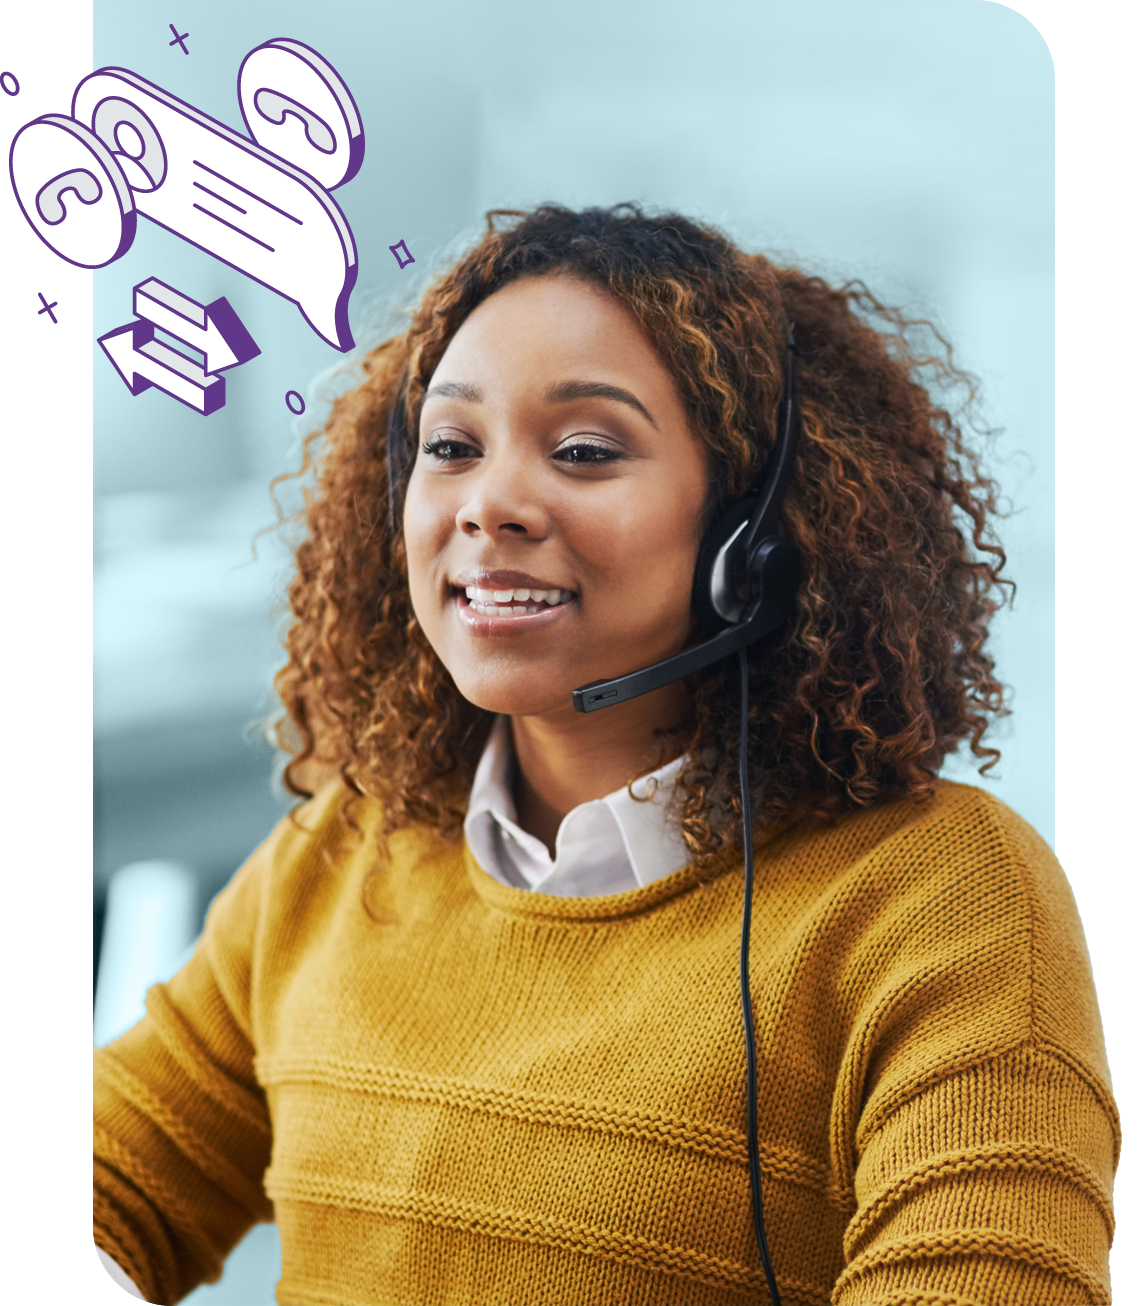 A smiling customer support agent with an overlay of various symbols conveying support across channels